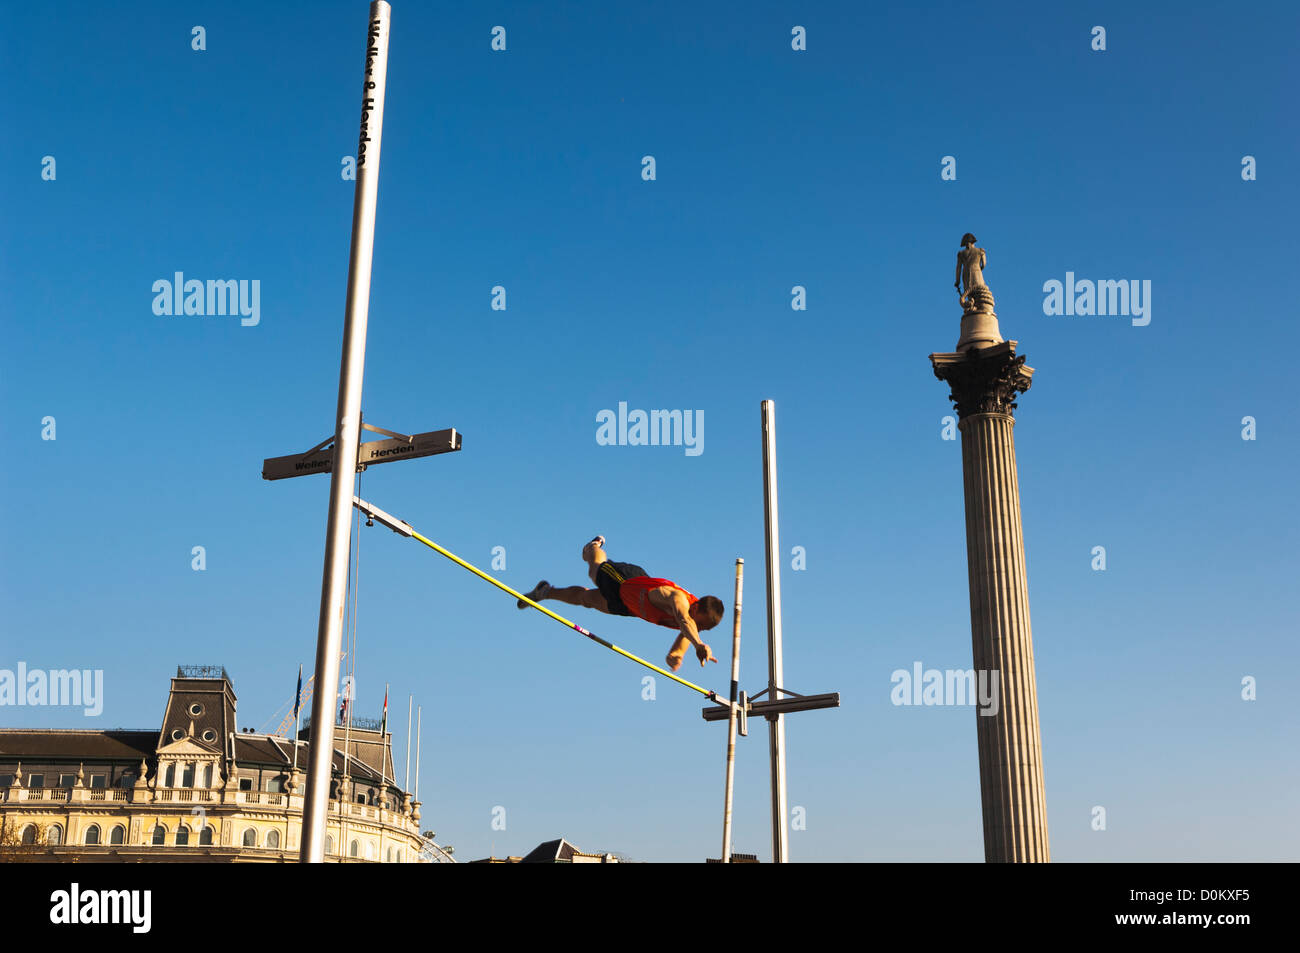 Pole vault in Trafalgar Square as part of a celebration of Dutch culture during the Holland House Festival. Stock Photo